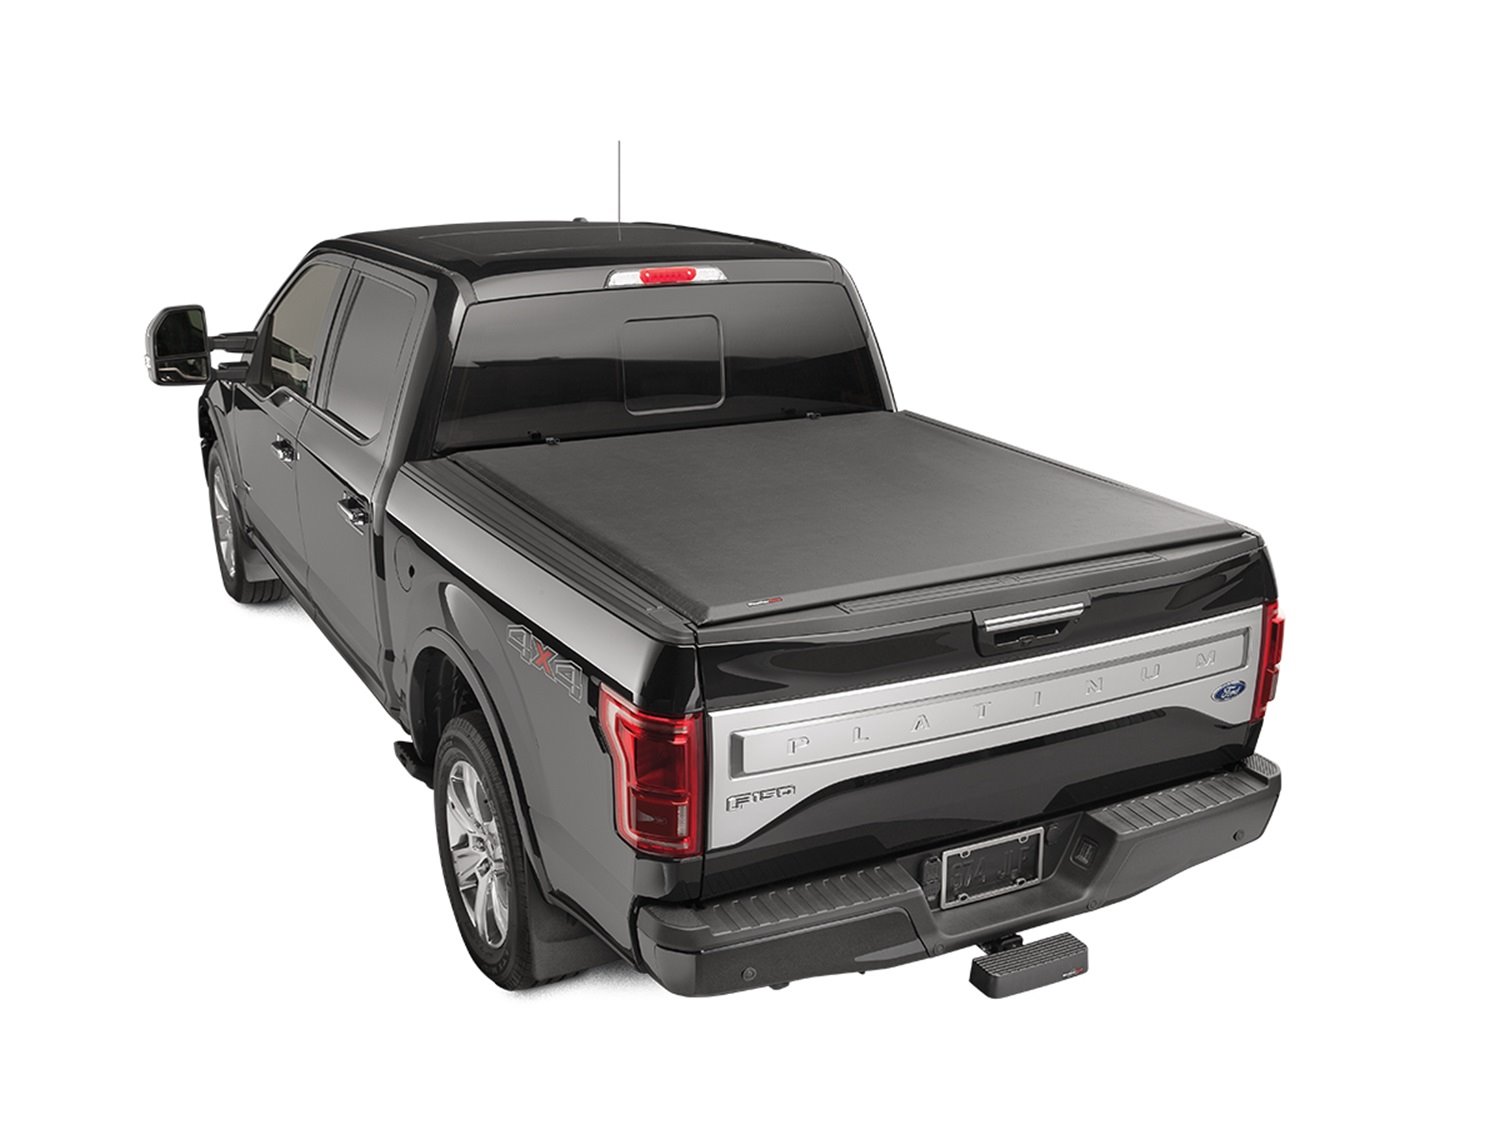 ROLL UP TRUCK BED COVER B TOYOTA TACOMA 2016-2017 TOYOTA TACOMA 5 -0 BED